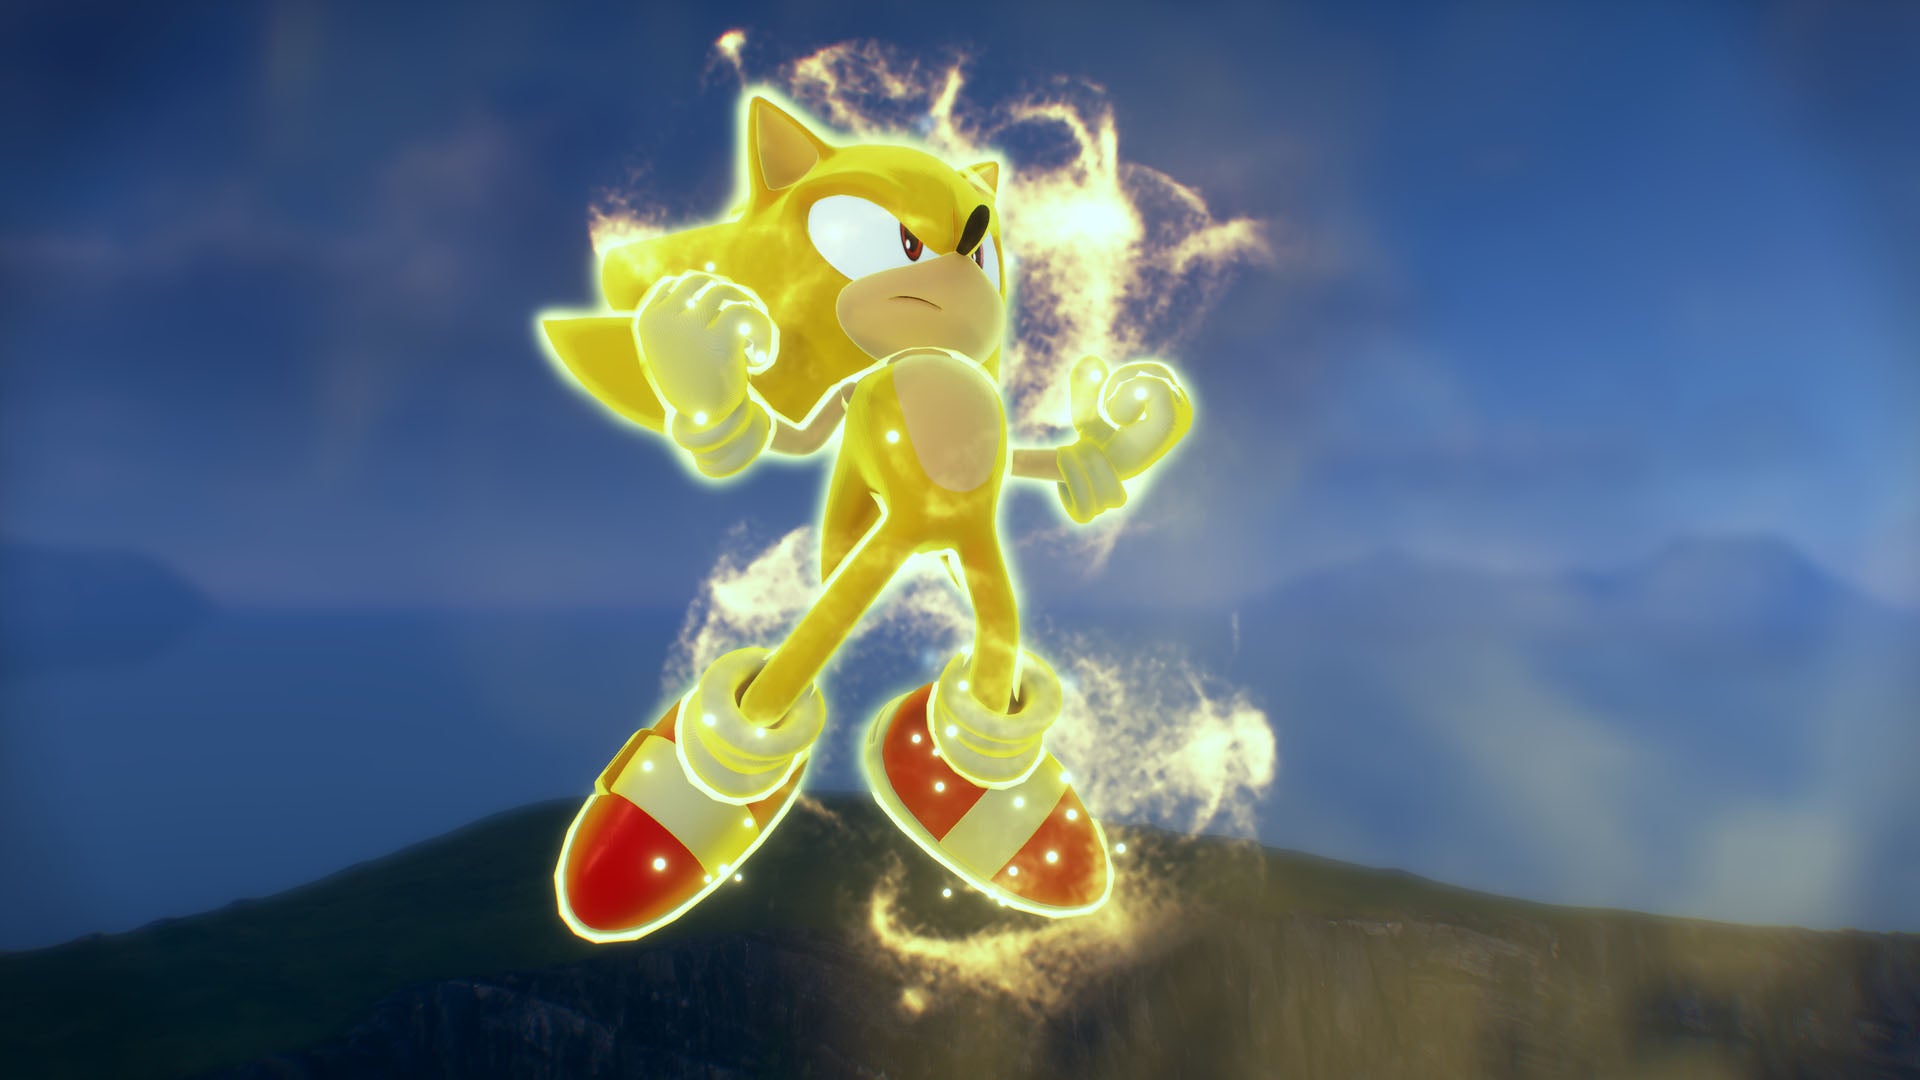 Sonic turns into an electric yellow "Super Sonic" in Sonic Frontiers.